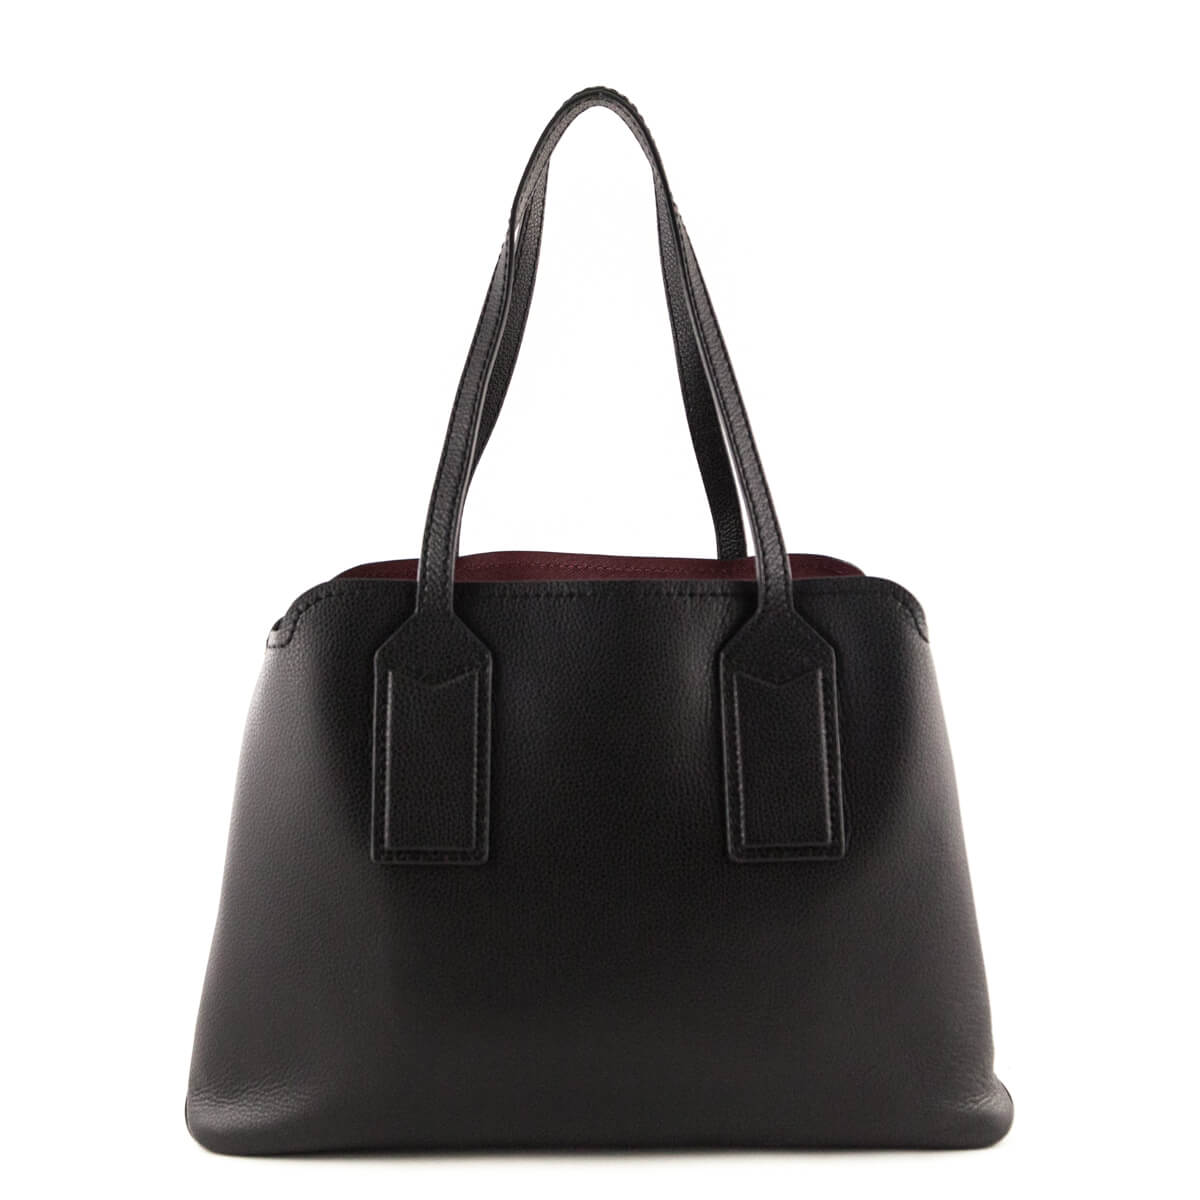 Marc Jacobs Black Leather Editor Tote - Secondhand Designer Bags